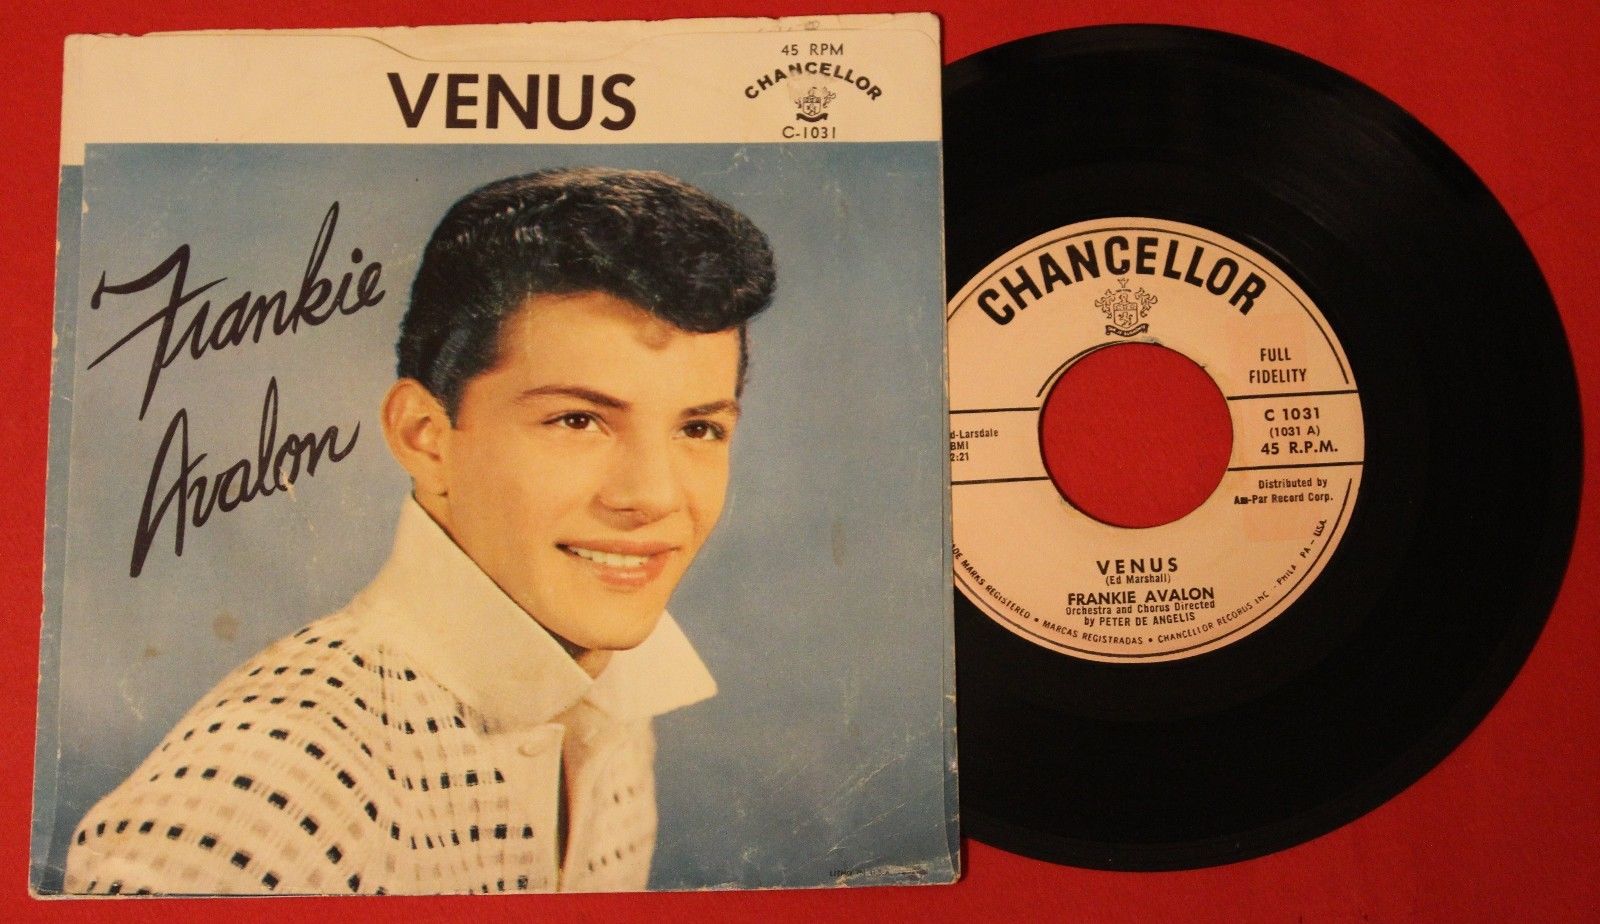 popsike.com - FRANKIE AVALON "Venus" 1959 High Grade TEEN BALLAD with  PICTURE SLEEVE - NM - auction details